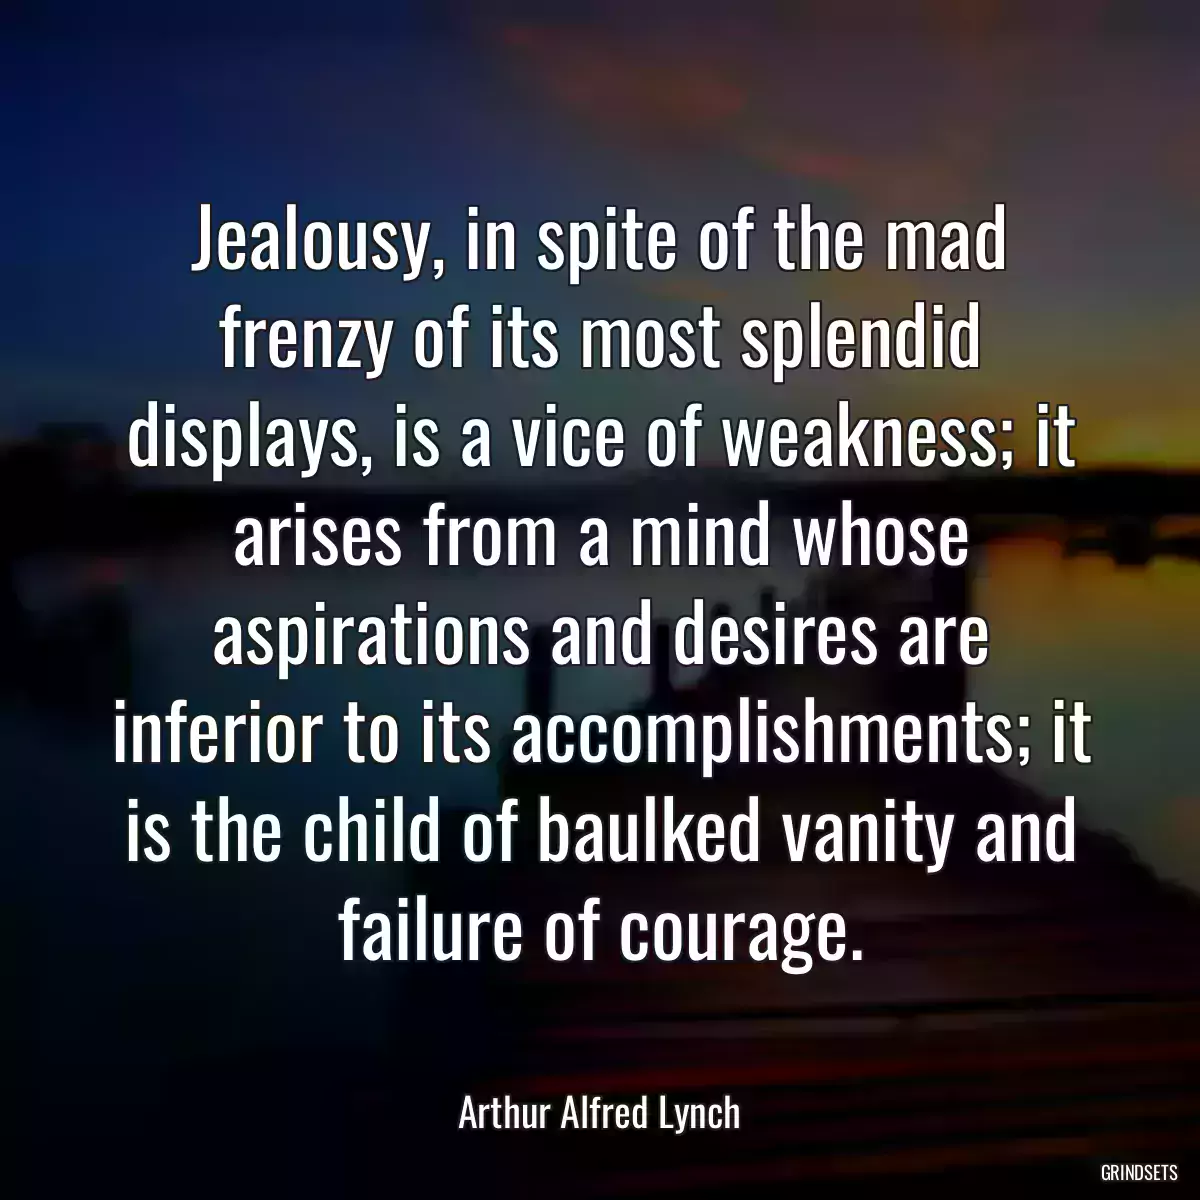 Jealousy, in spite of the mad frenzy of its most splendid displays, is a vice of weakness; it arises from a mind whose aspirations and desires are inferior to its accomplishments; it is the child of baulked vanity and failure of courage.